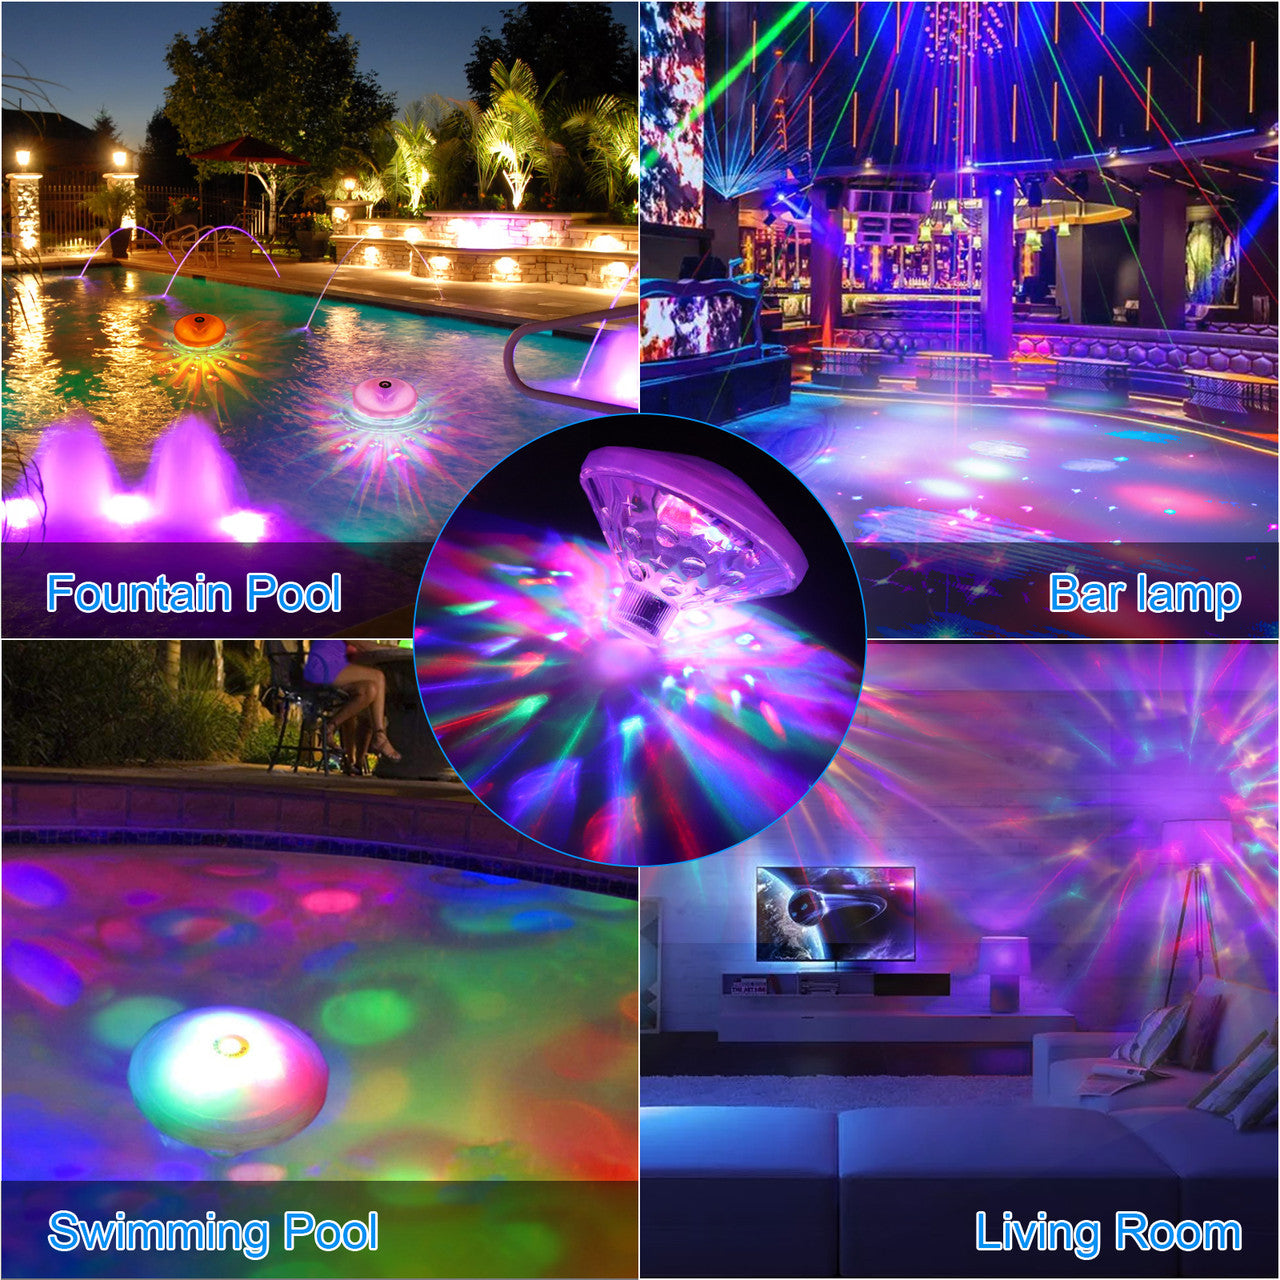 LED Diamond Pool Light with 8 Different Light Modes, IP67 Waterproof Rating, Batteries Required